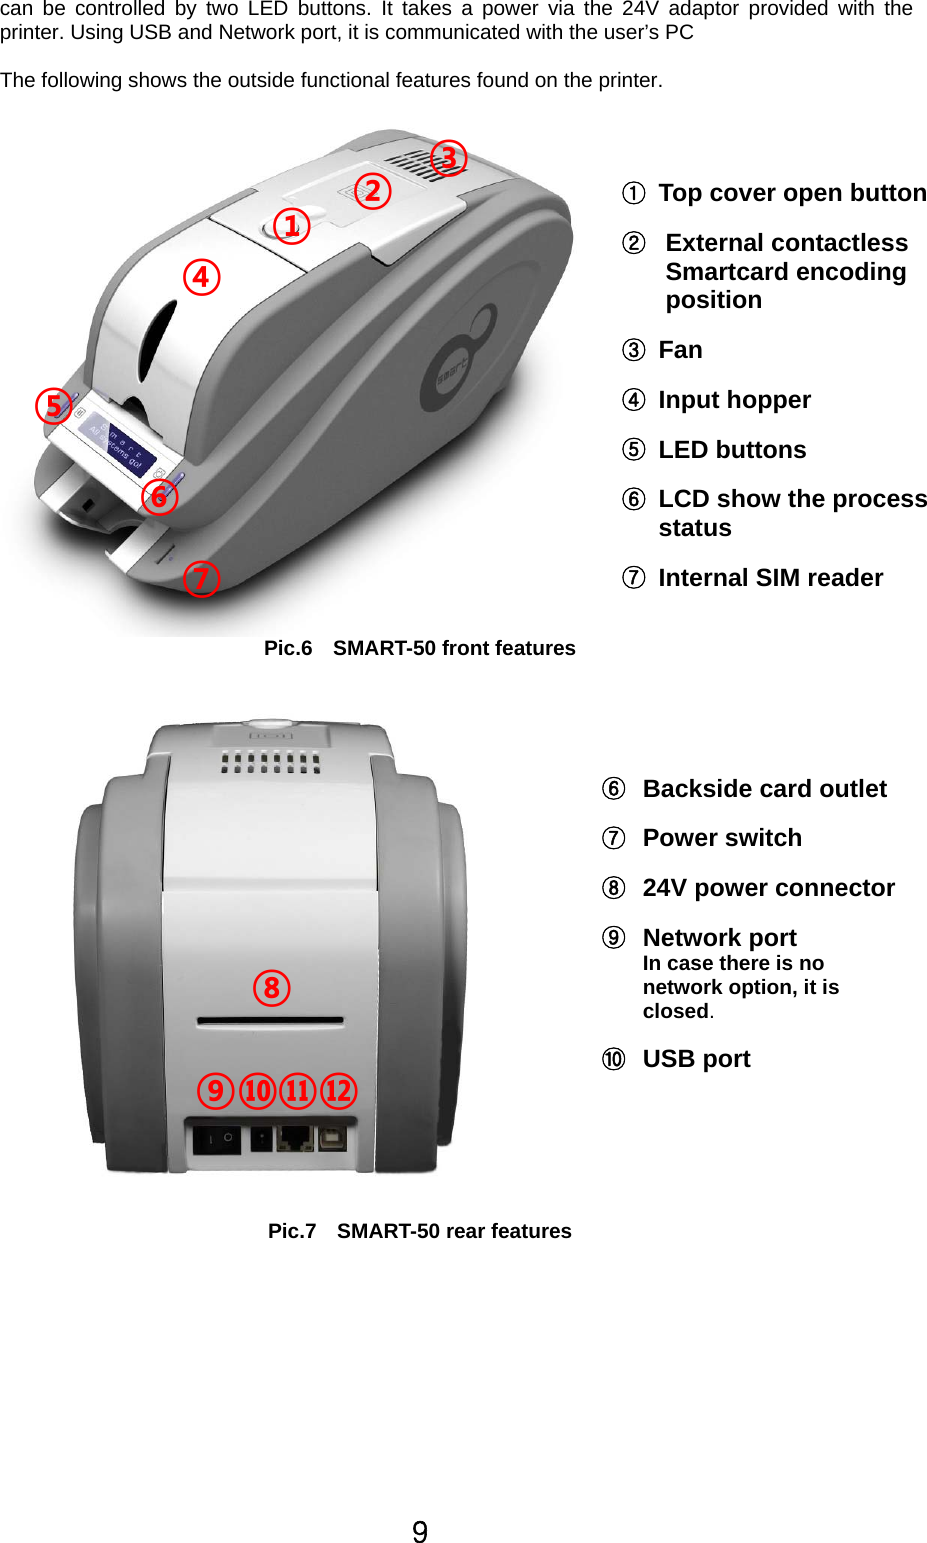 9 can be controlled by two LED buttons. It takes a power via the 24V adaptor provided with the printer. Using USB and Network port, it is communicated with the user’s PC  The following shows the outside functional features found on the printer.   Pic.6  SMART-50 front features     Pic.7    SMART-50 rear features   ① ② ③ ④ ⑤ ⑥ ⑦ ①Top cover open button  ②External contactless   Smartcard encoding position  ③Fan  ④Input hopper  ⑤LED buttons  ⑥LCD show the process status  ⑦Internal SIM reader ⑧ ⑨ ⑩ ⑪ ⑥Backside card outlet  ⑦Power switch  ⑧24V power connector  ⑨Network port In case there is no network option, it is closed.  ⑩USB port  ⑫ 